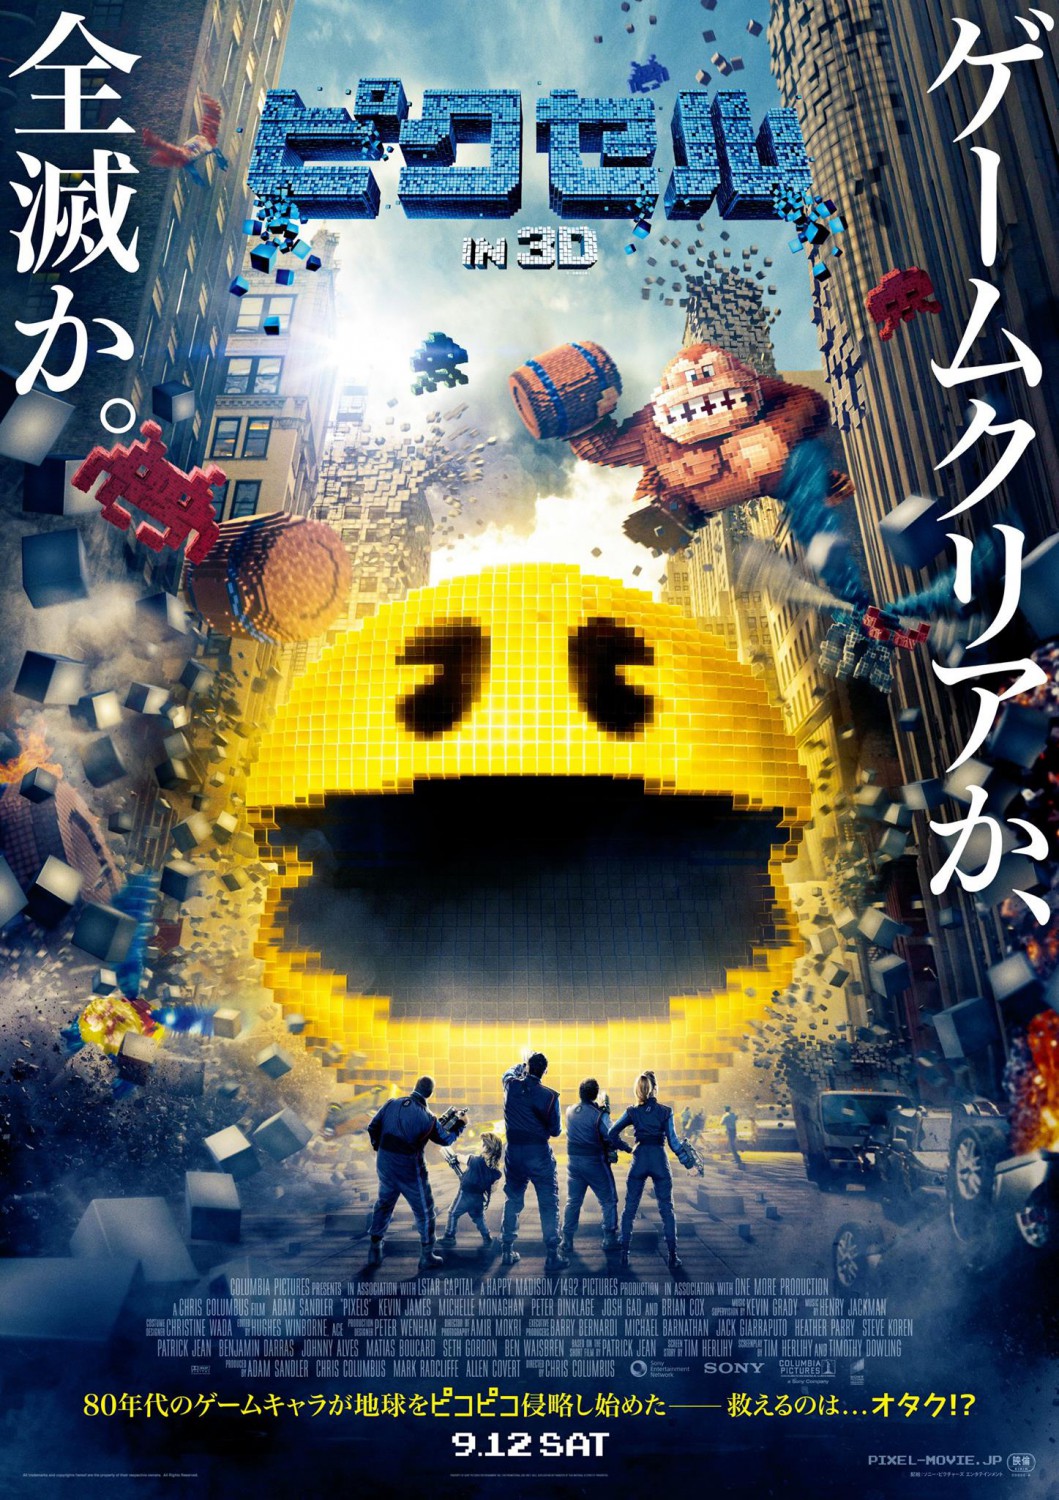 Extra Large Movie Poster Image for Pixels (#7 of 10)